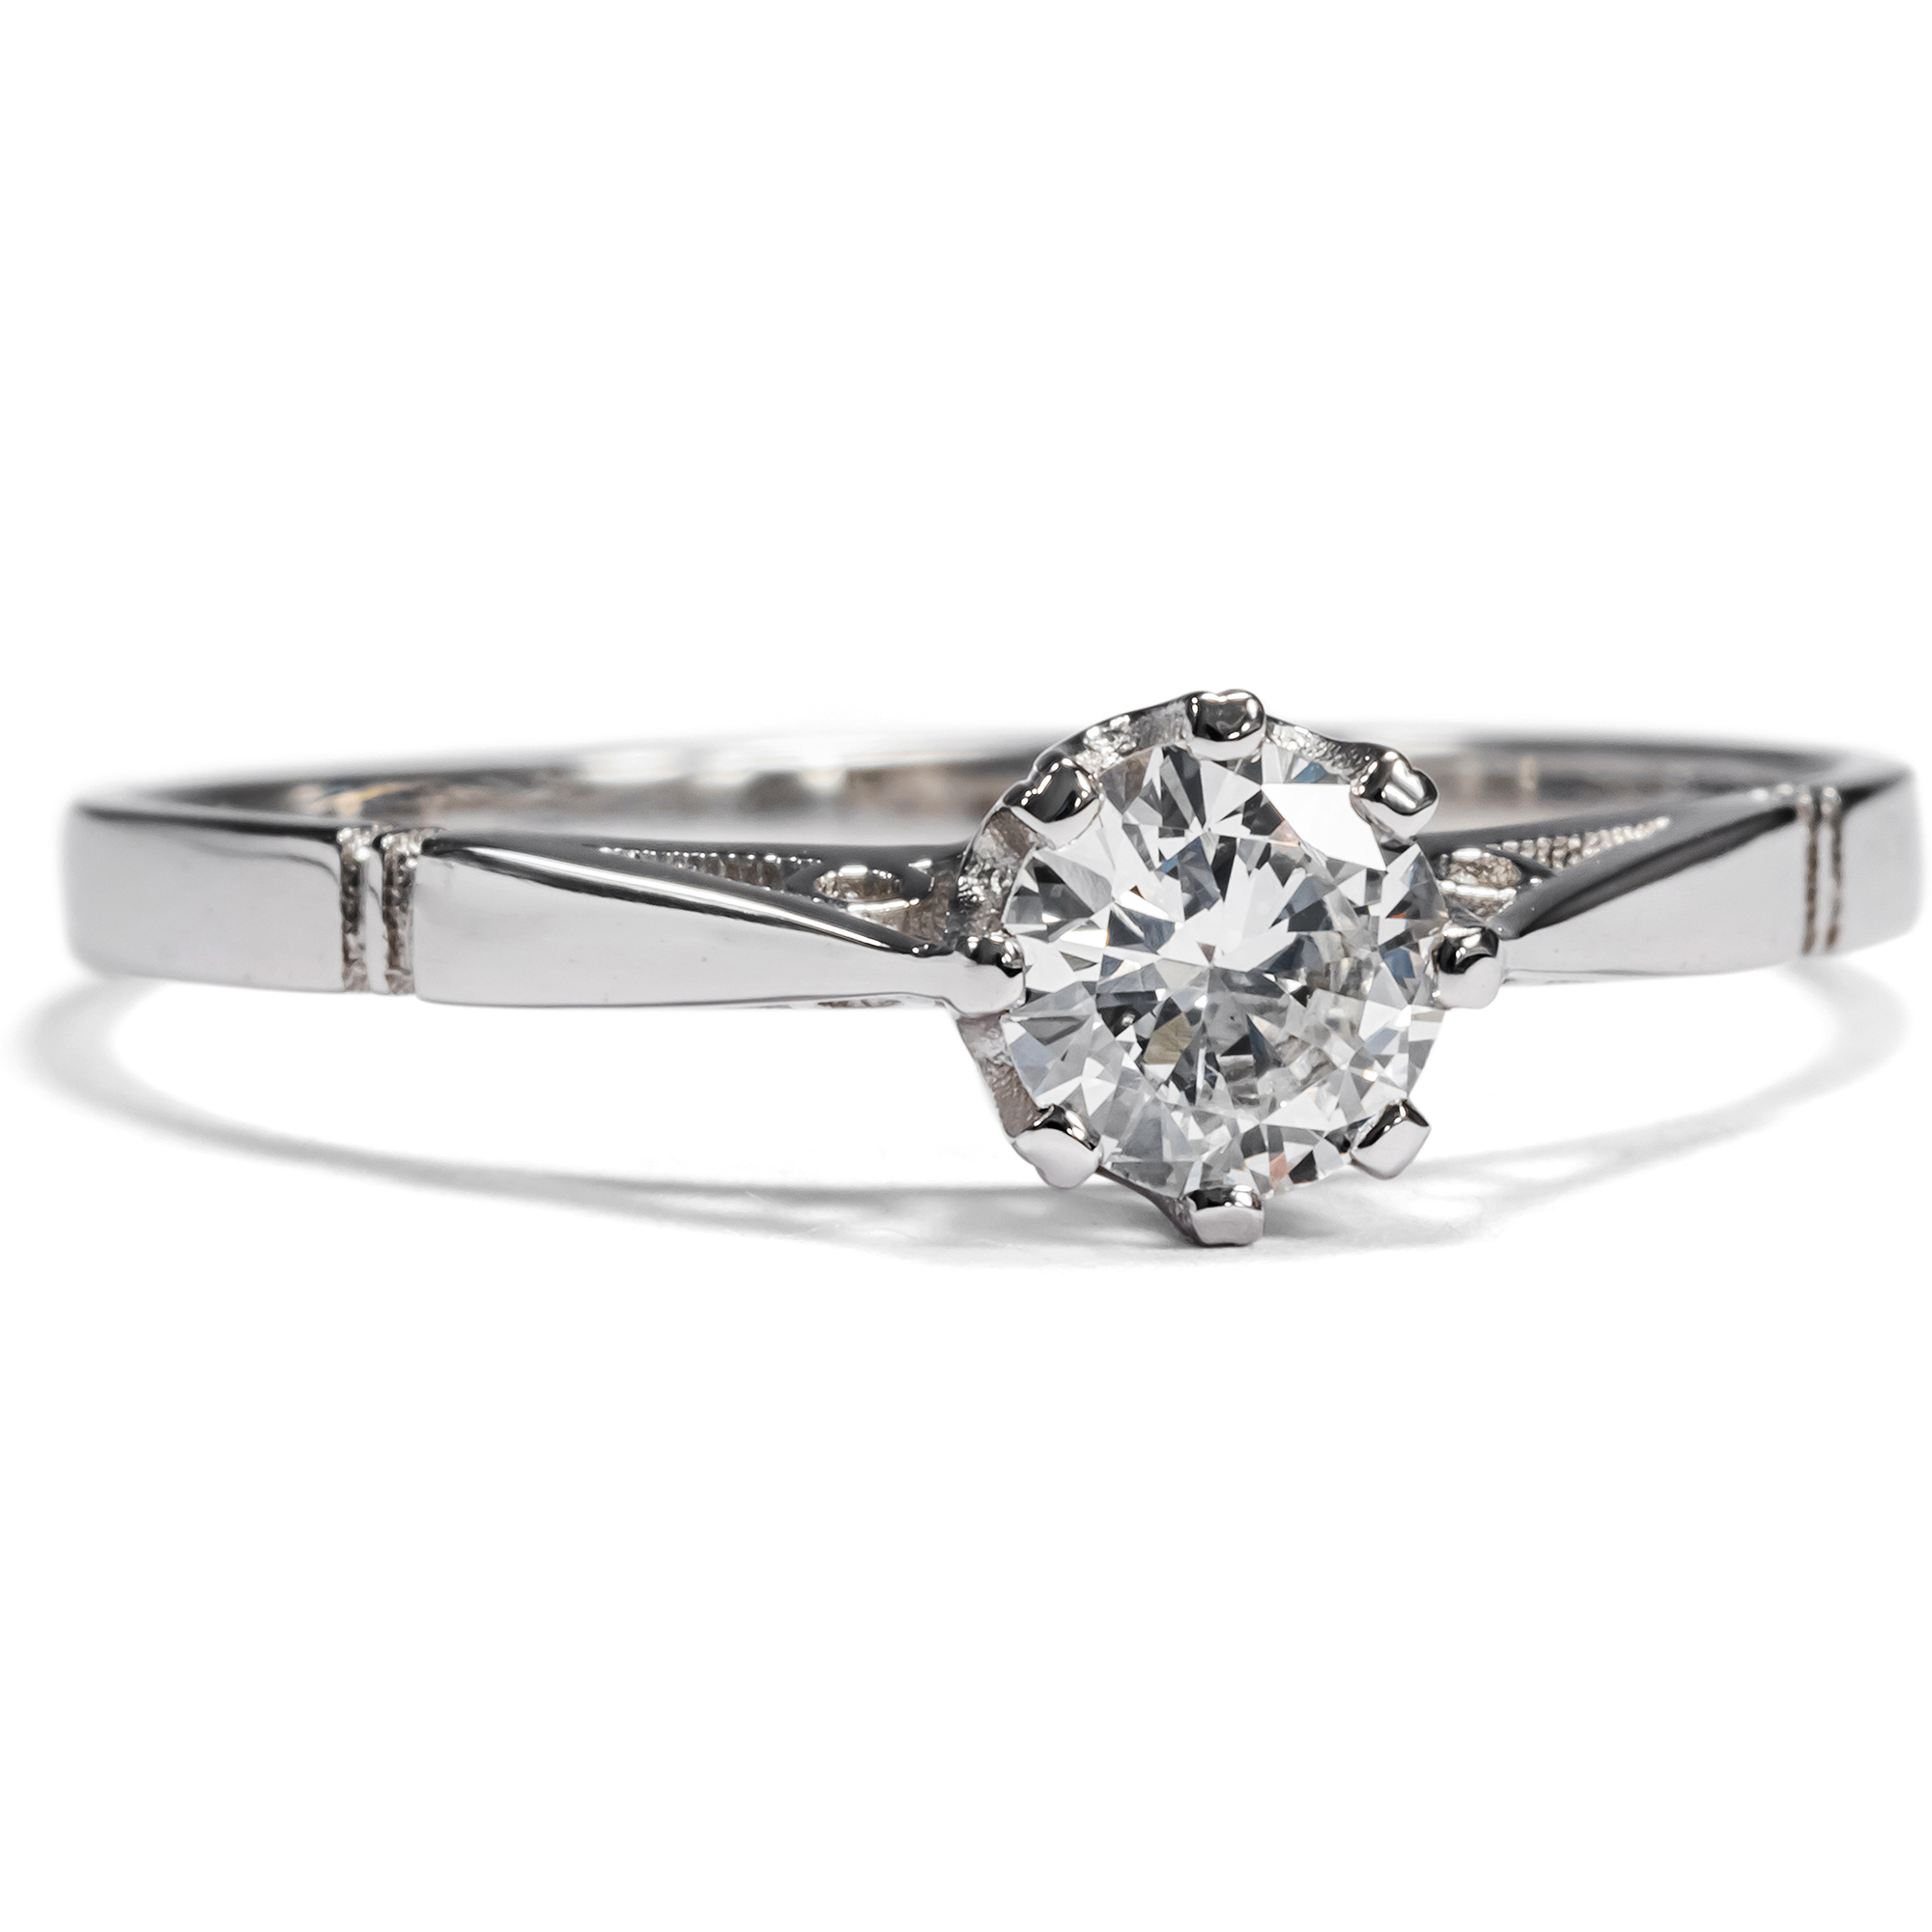 Classic Solitaire Ring With 0.35 Ct Vintage Diamond In Platinum From Our Workshop